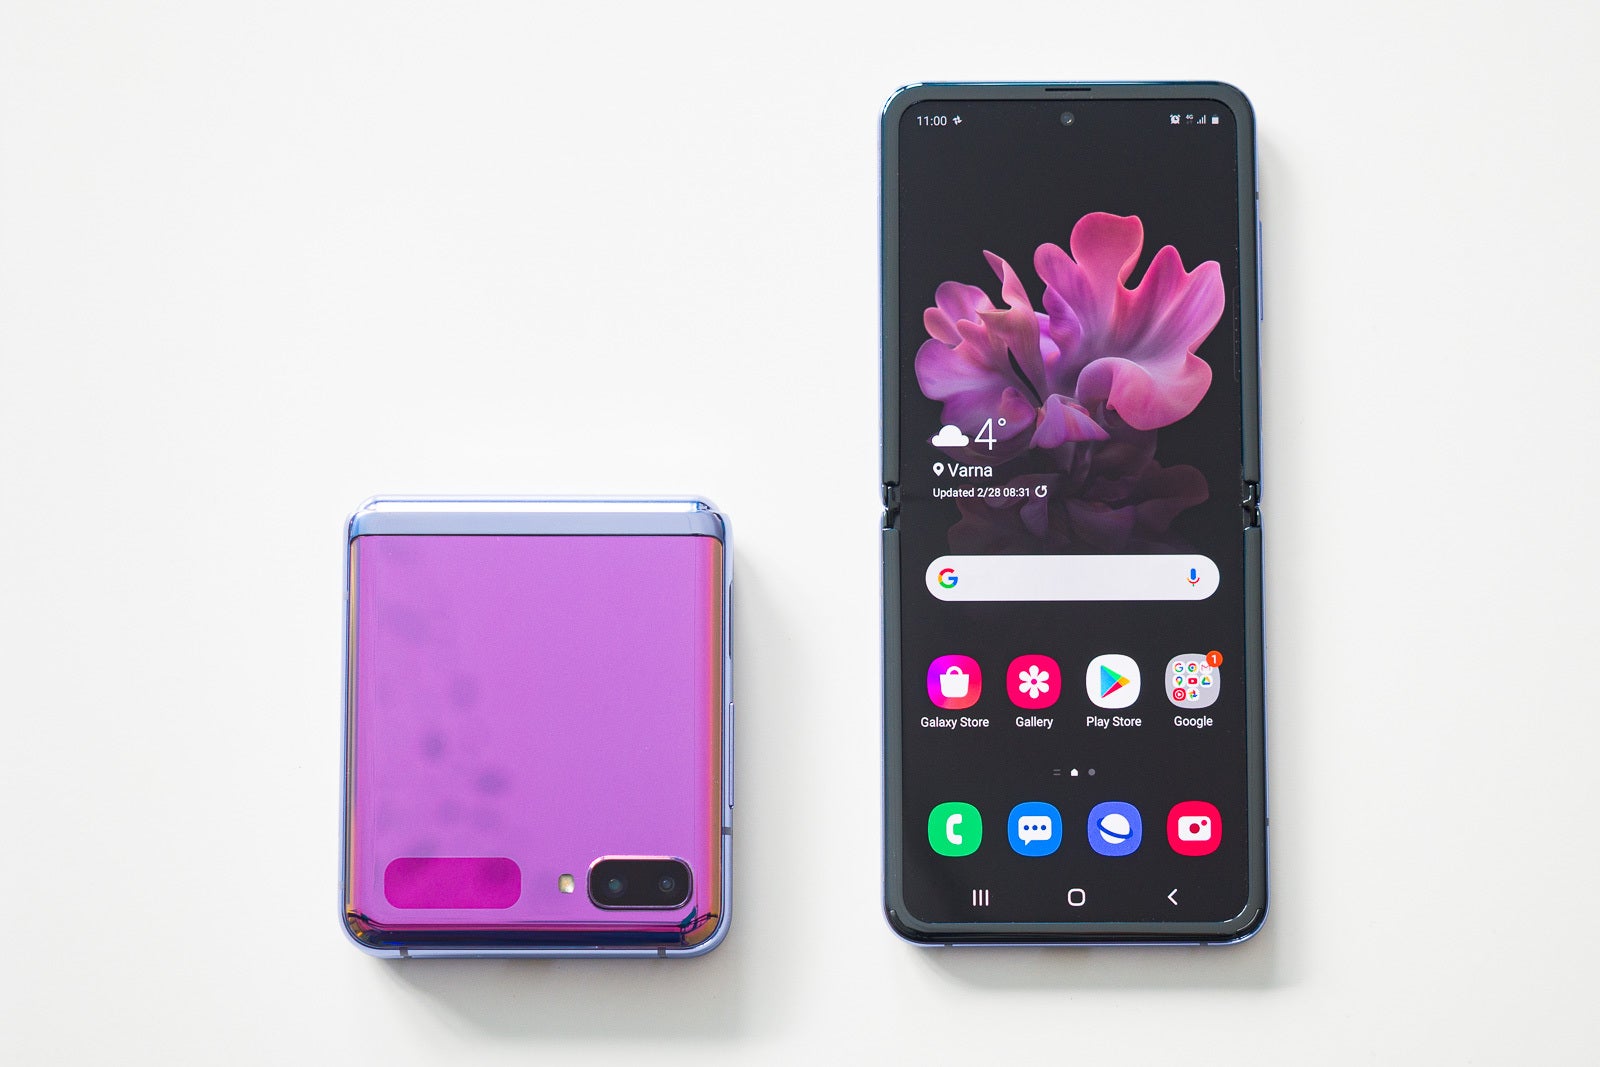 Samsung is unlikely to release an affordable foldable smartphone in 2021 - Budget Samsung Galaxy Z Fold Lite may not arrive this year